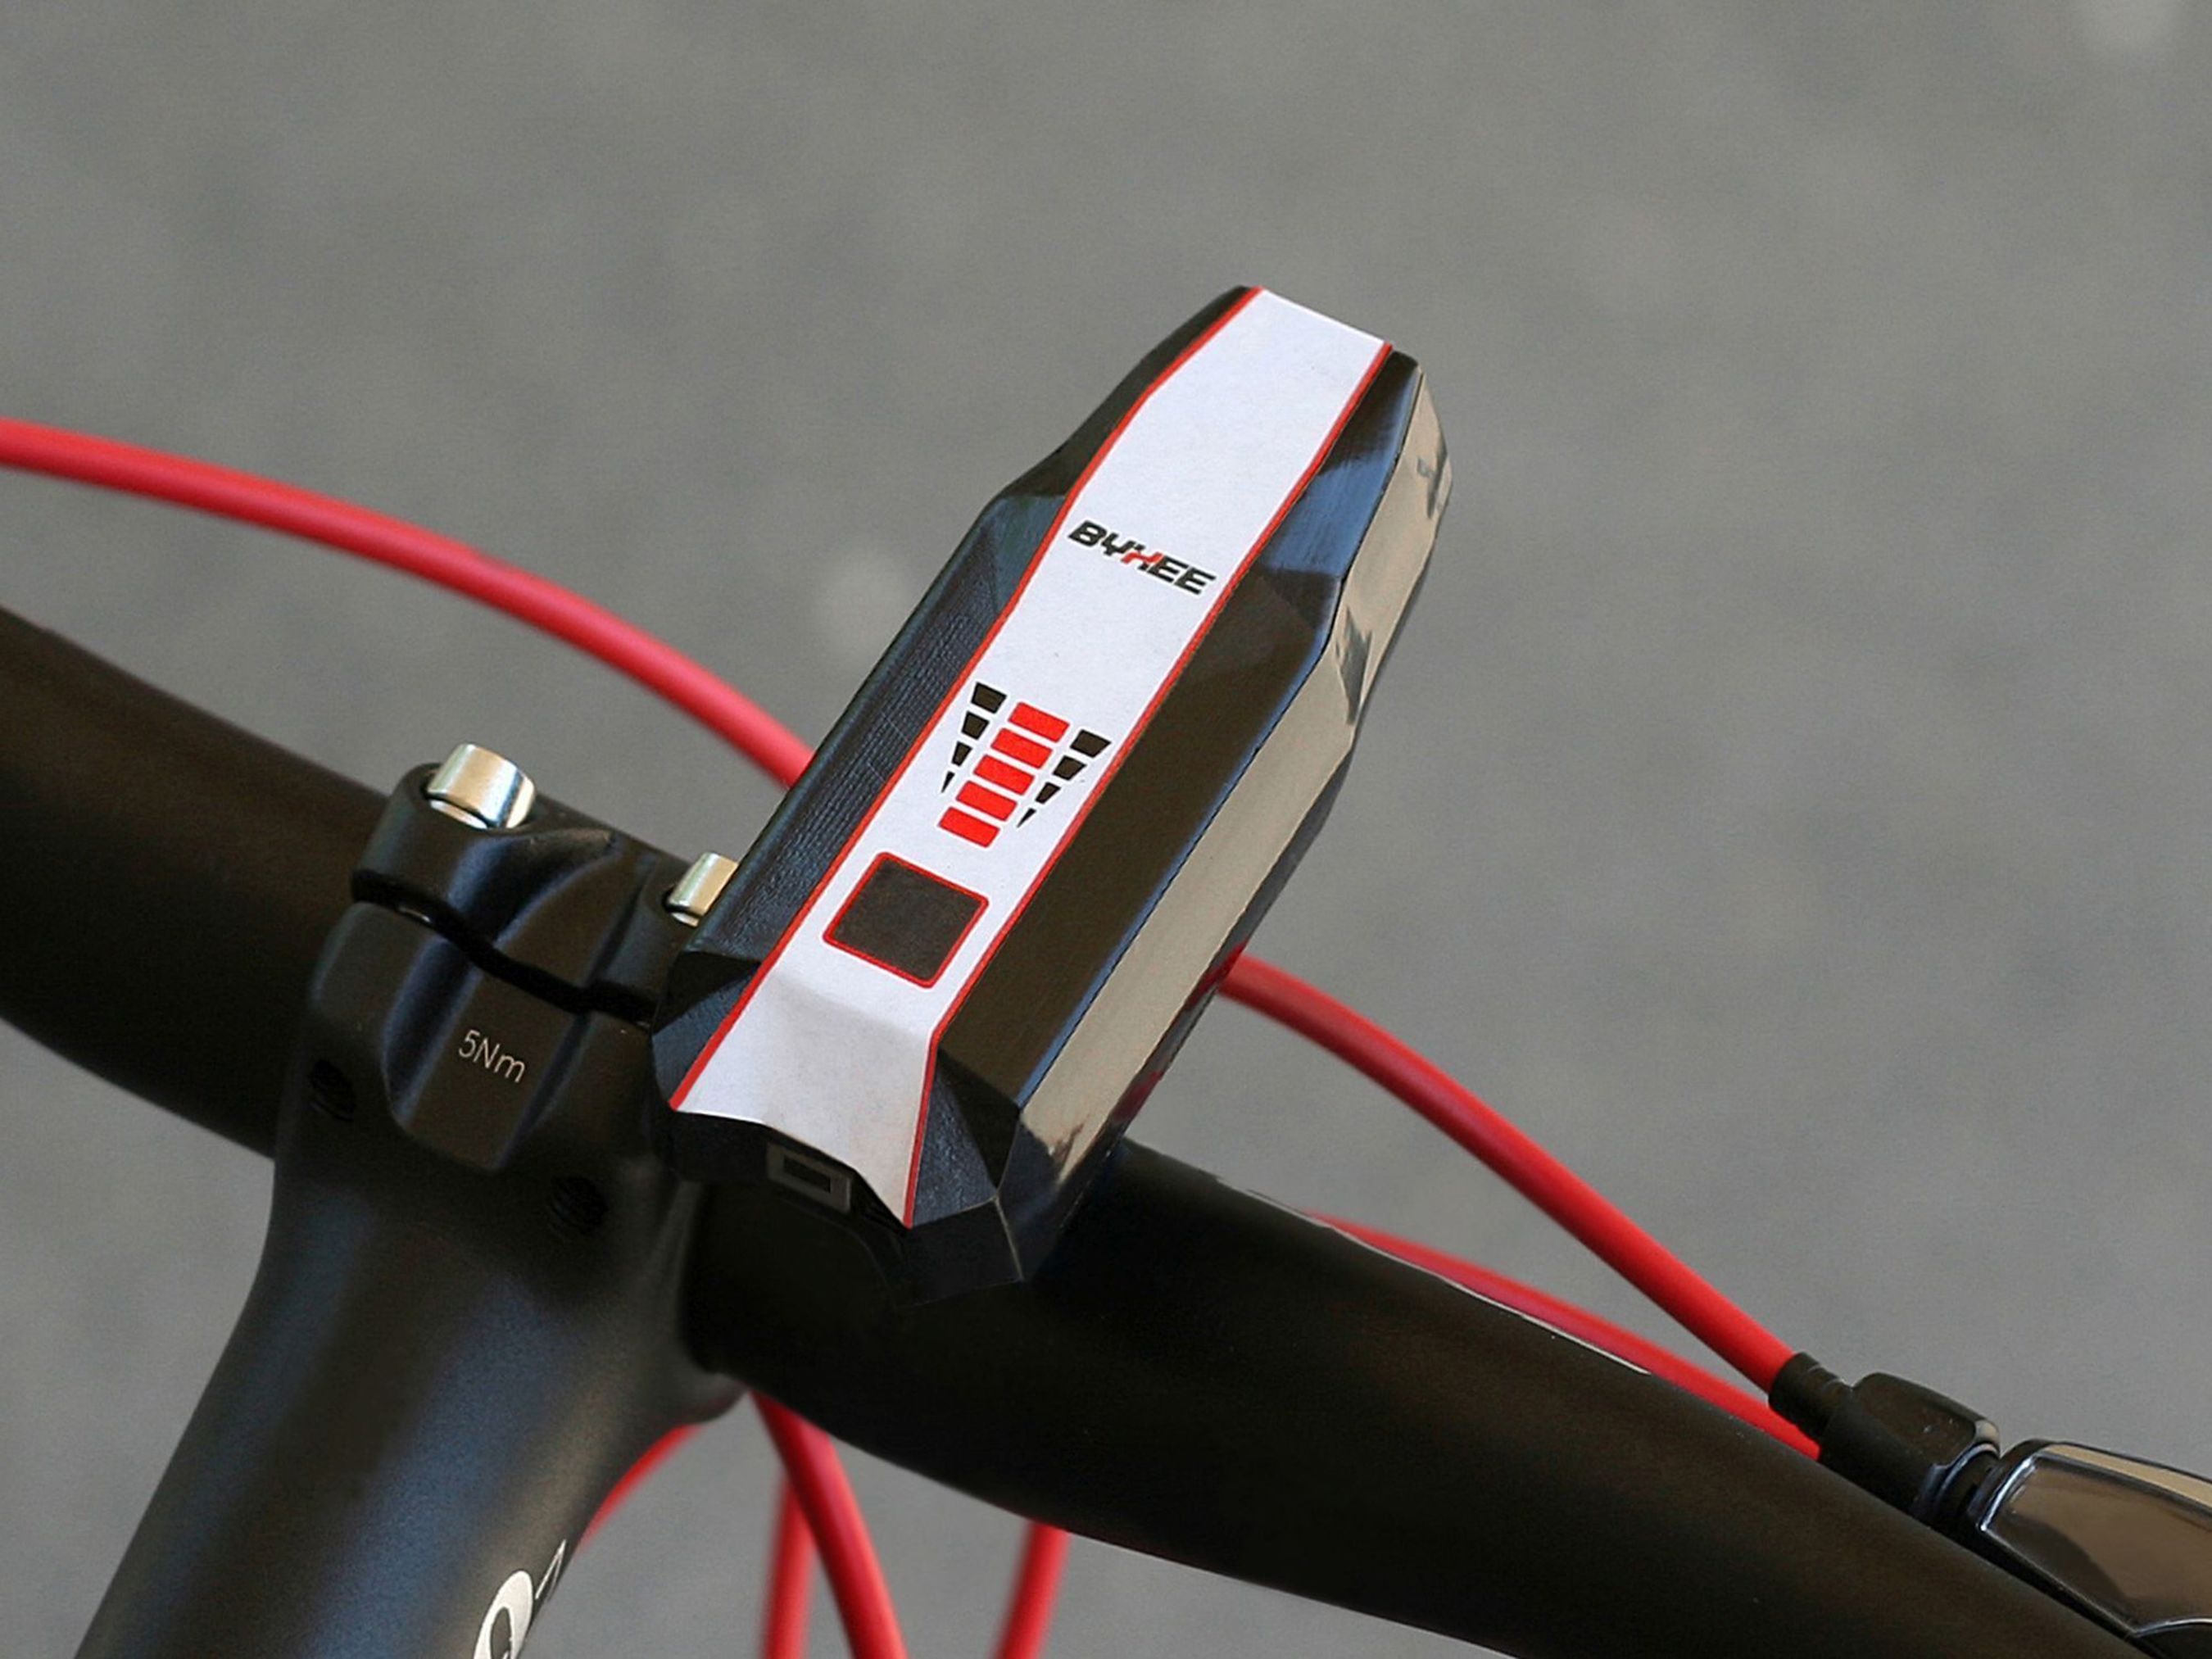 Byxee: the first smart active safety device for bicycles (PRNewsFoto/Byxee)